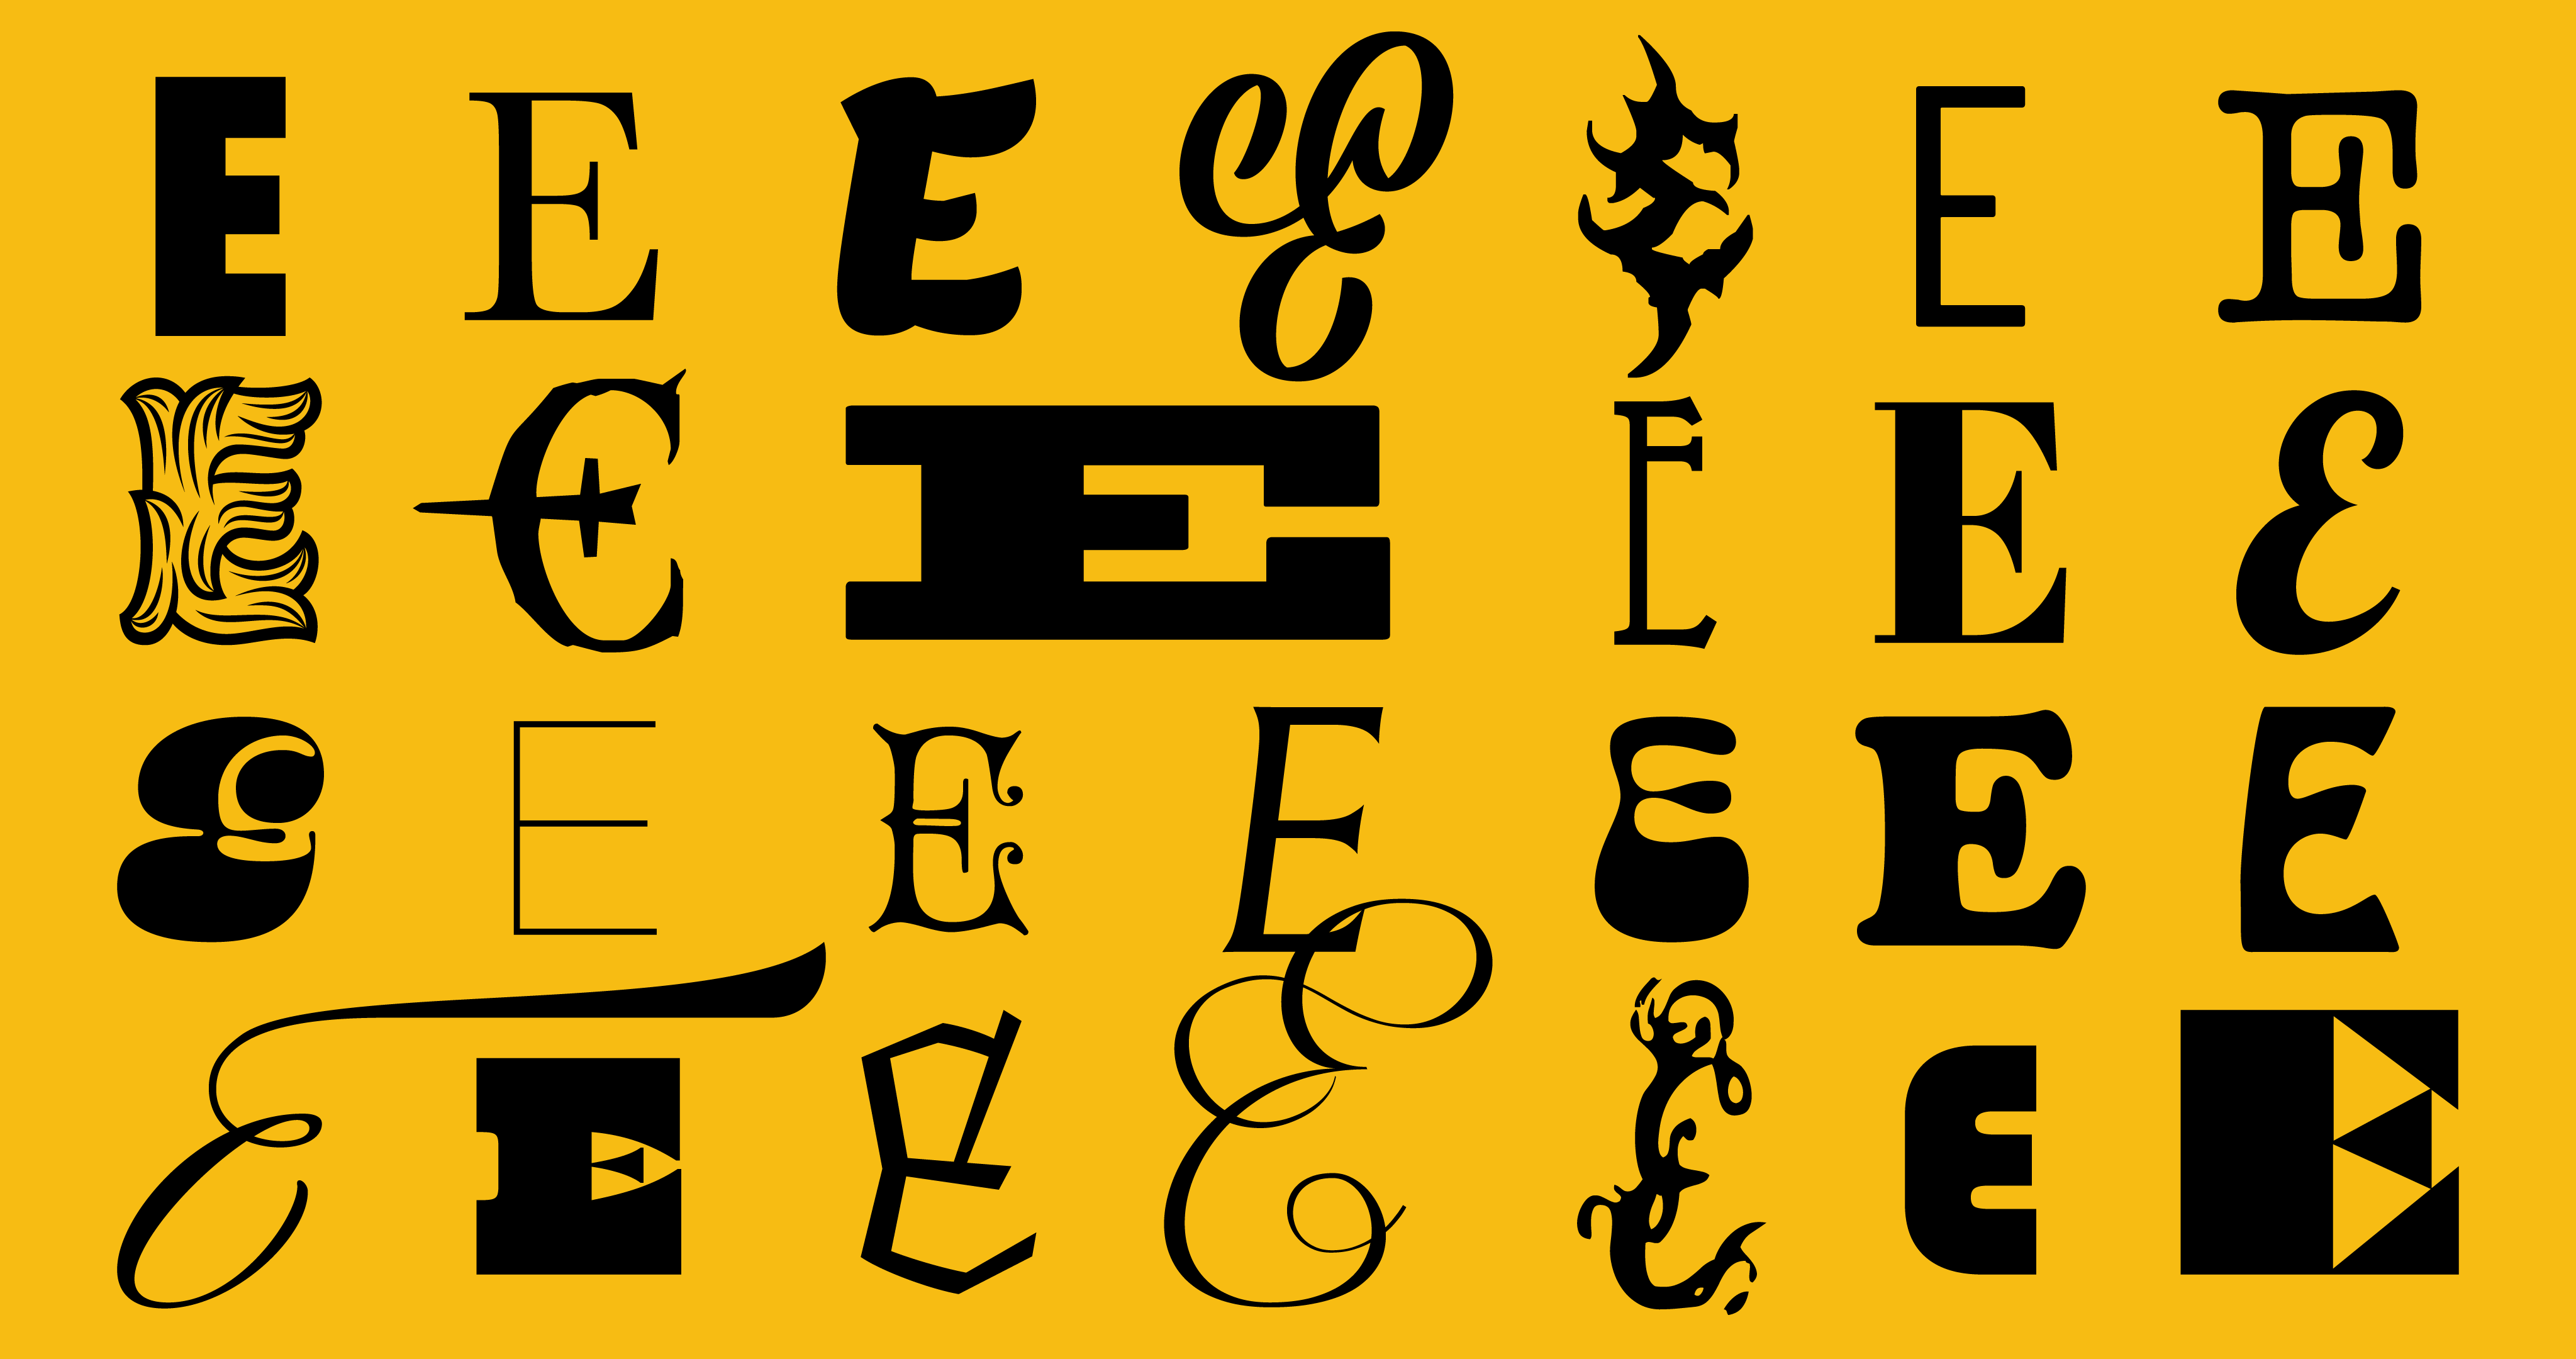 Photo shares examples of different types of font using the letter E.